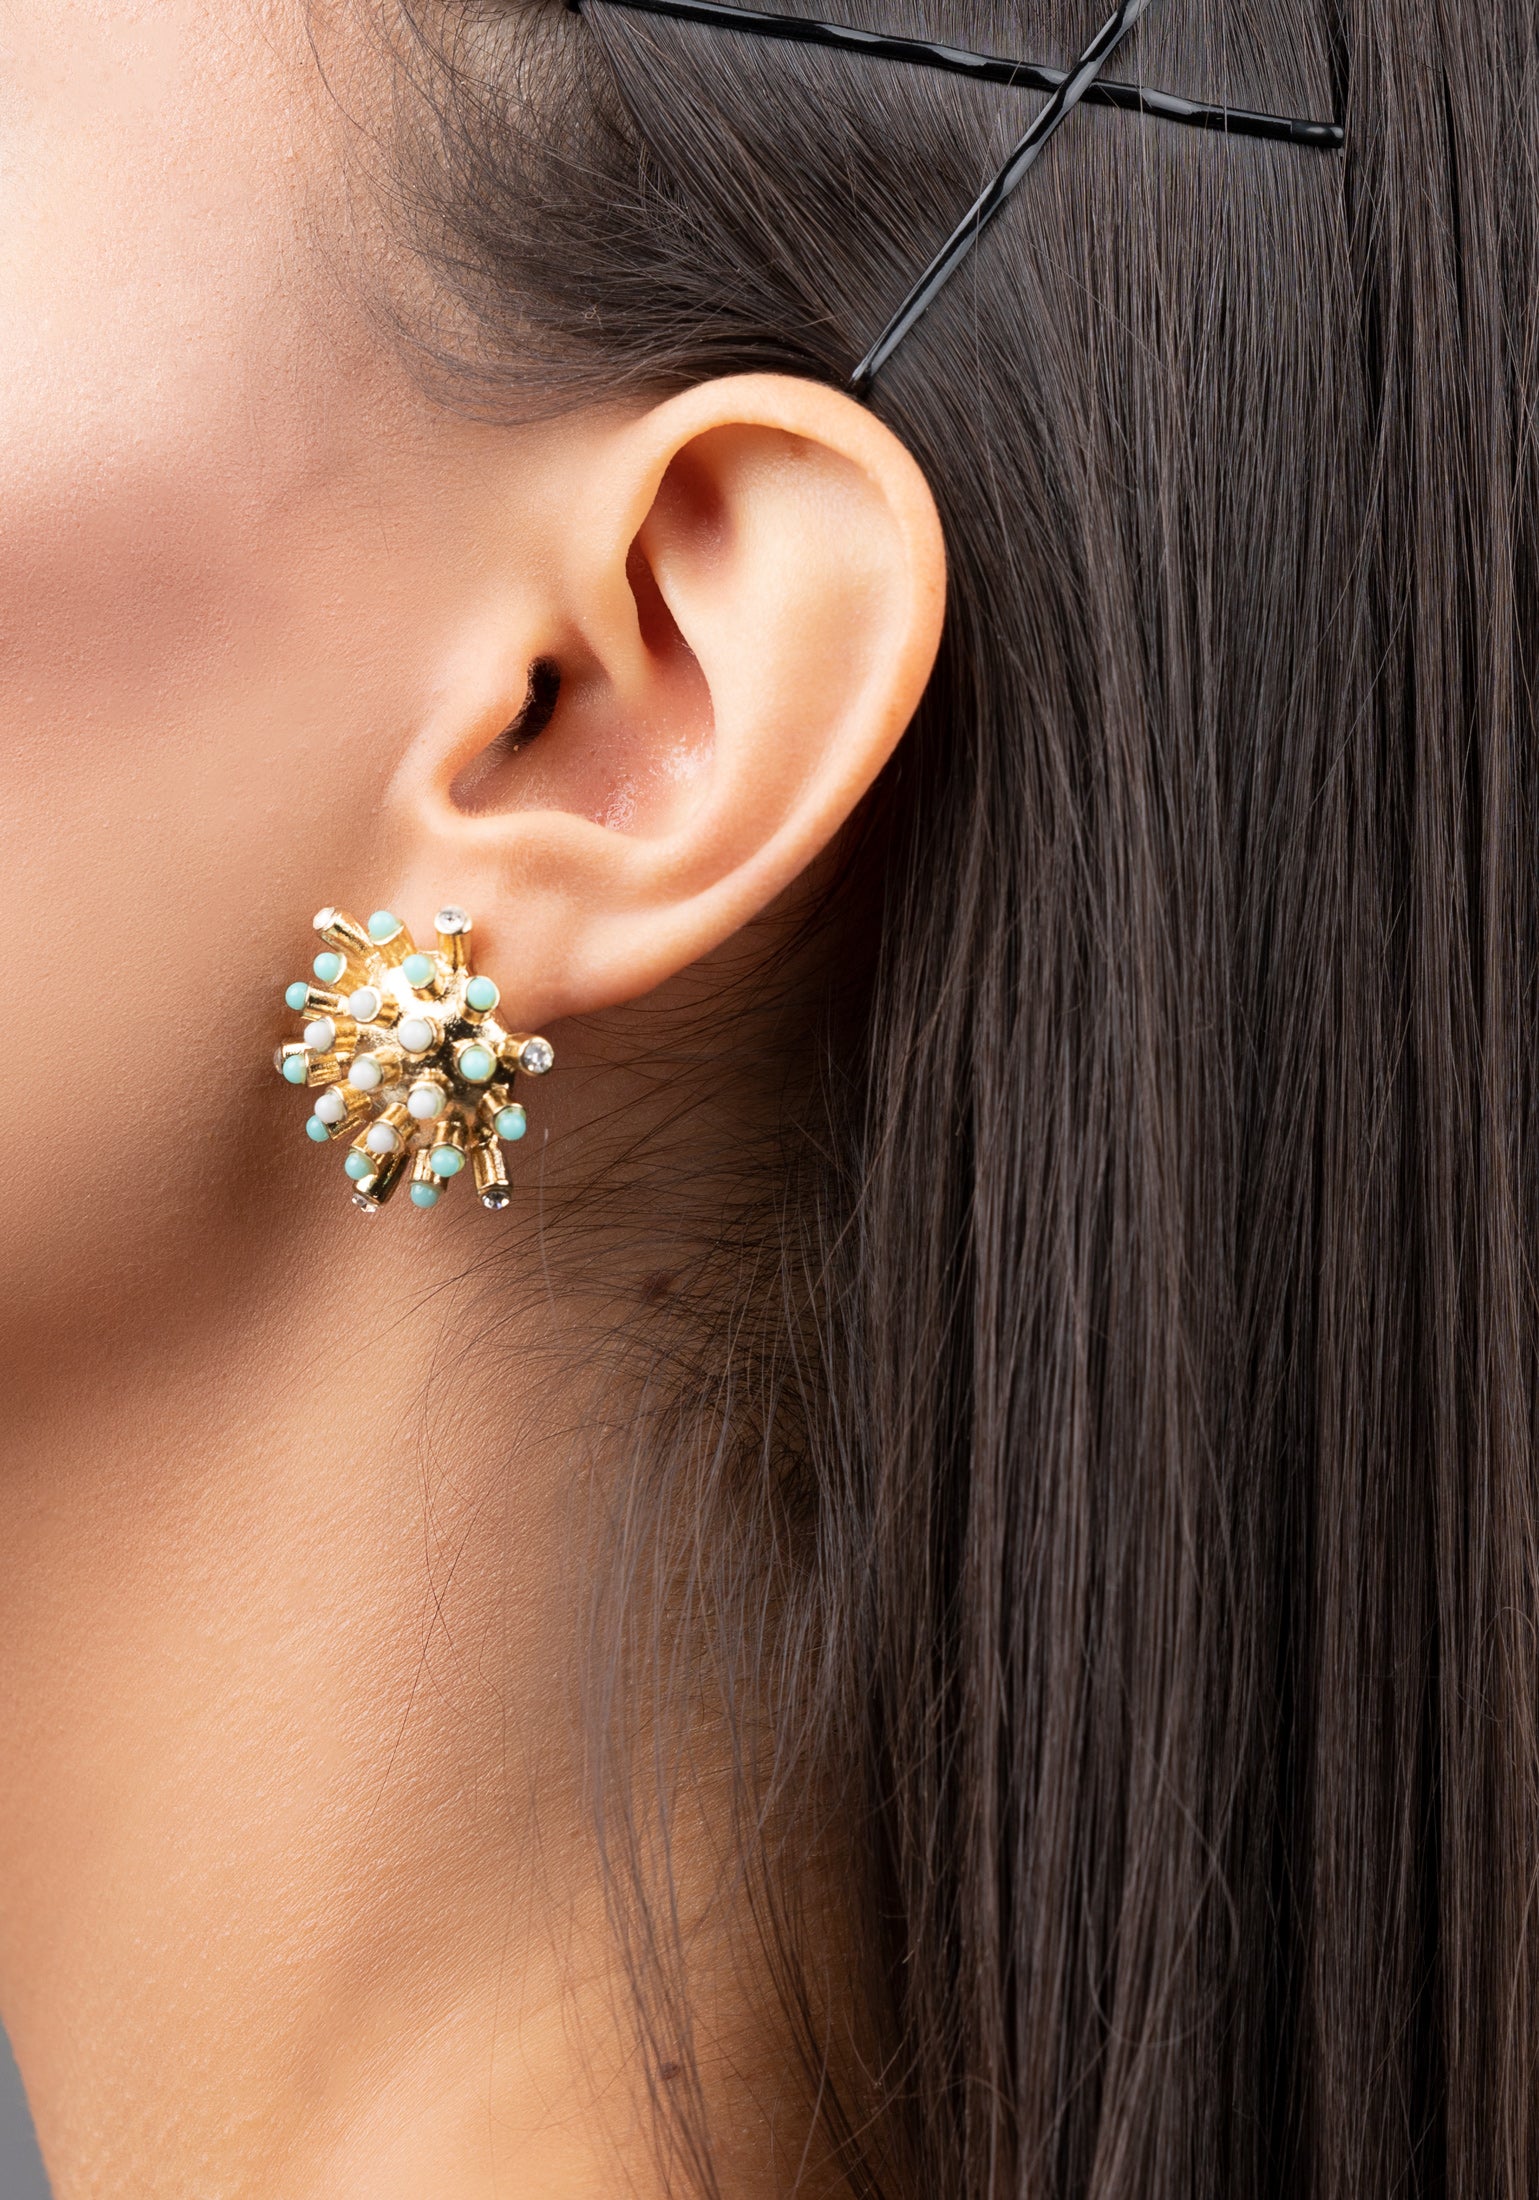 EARRINGS THAT EVERY MODERN LADY MUST OWN